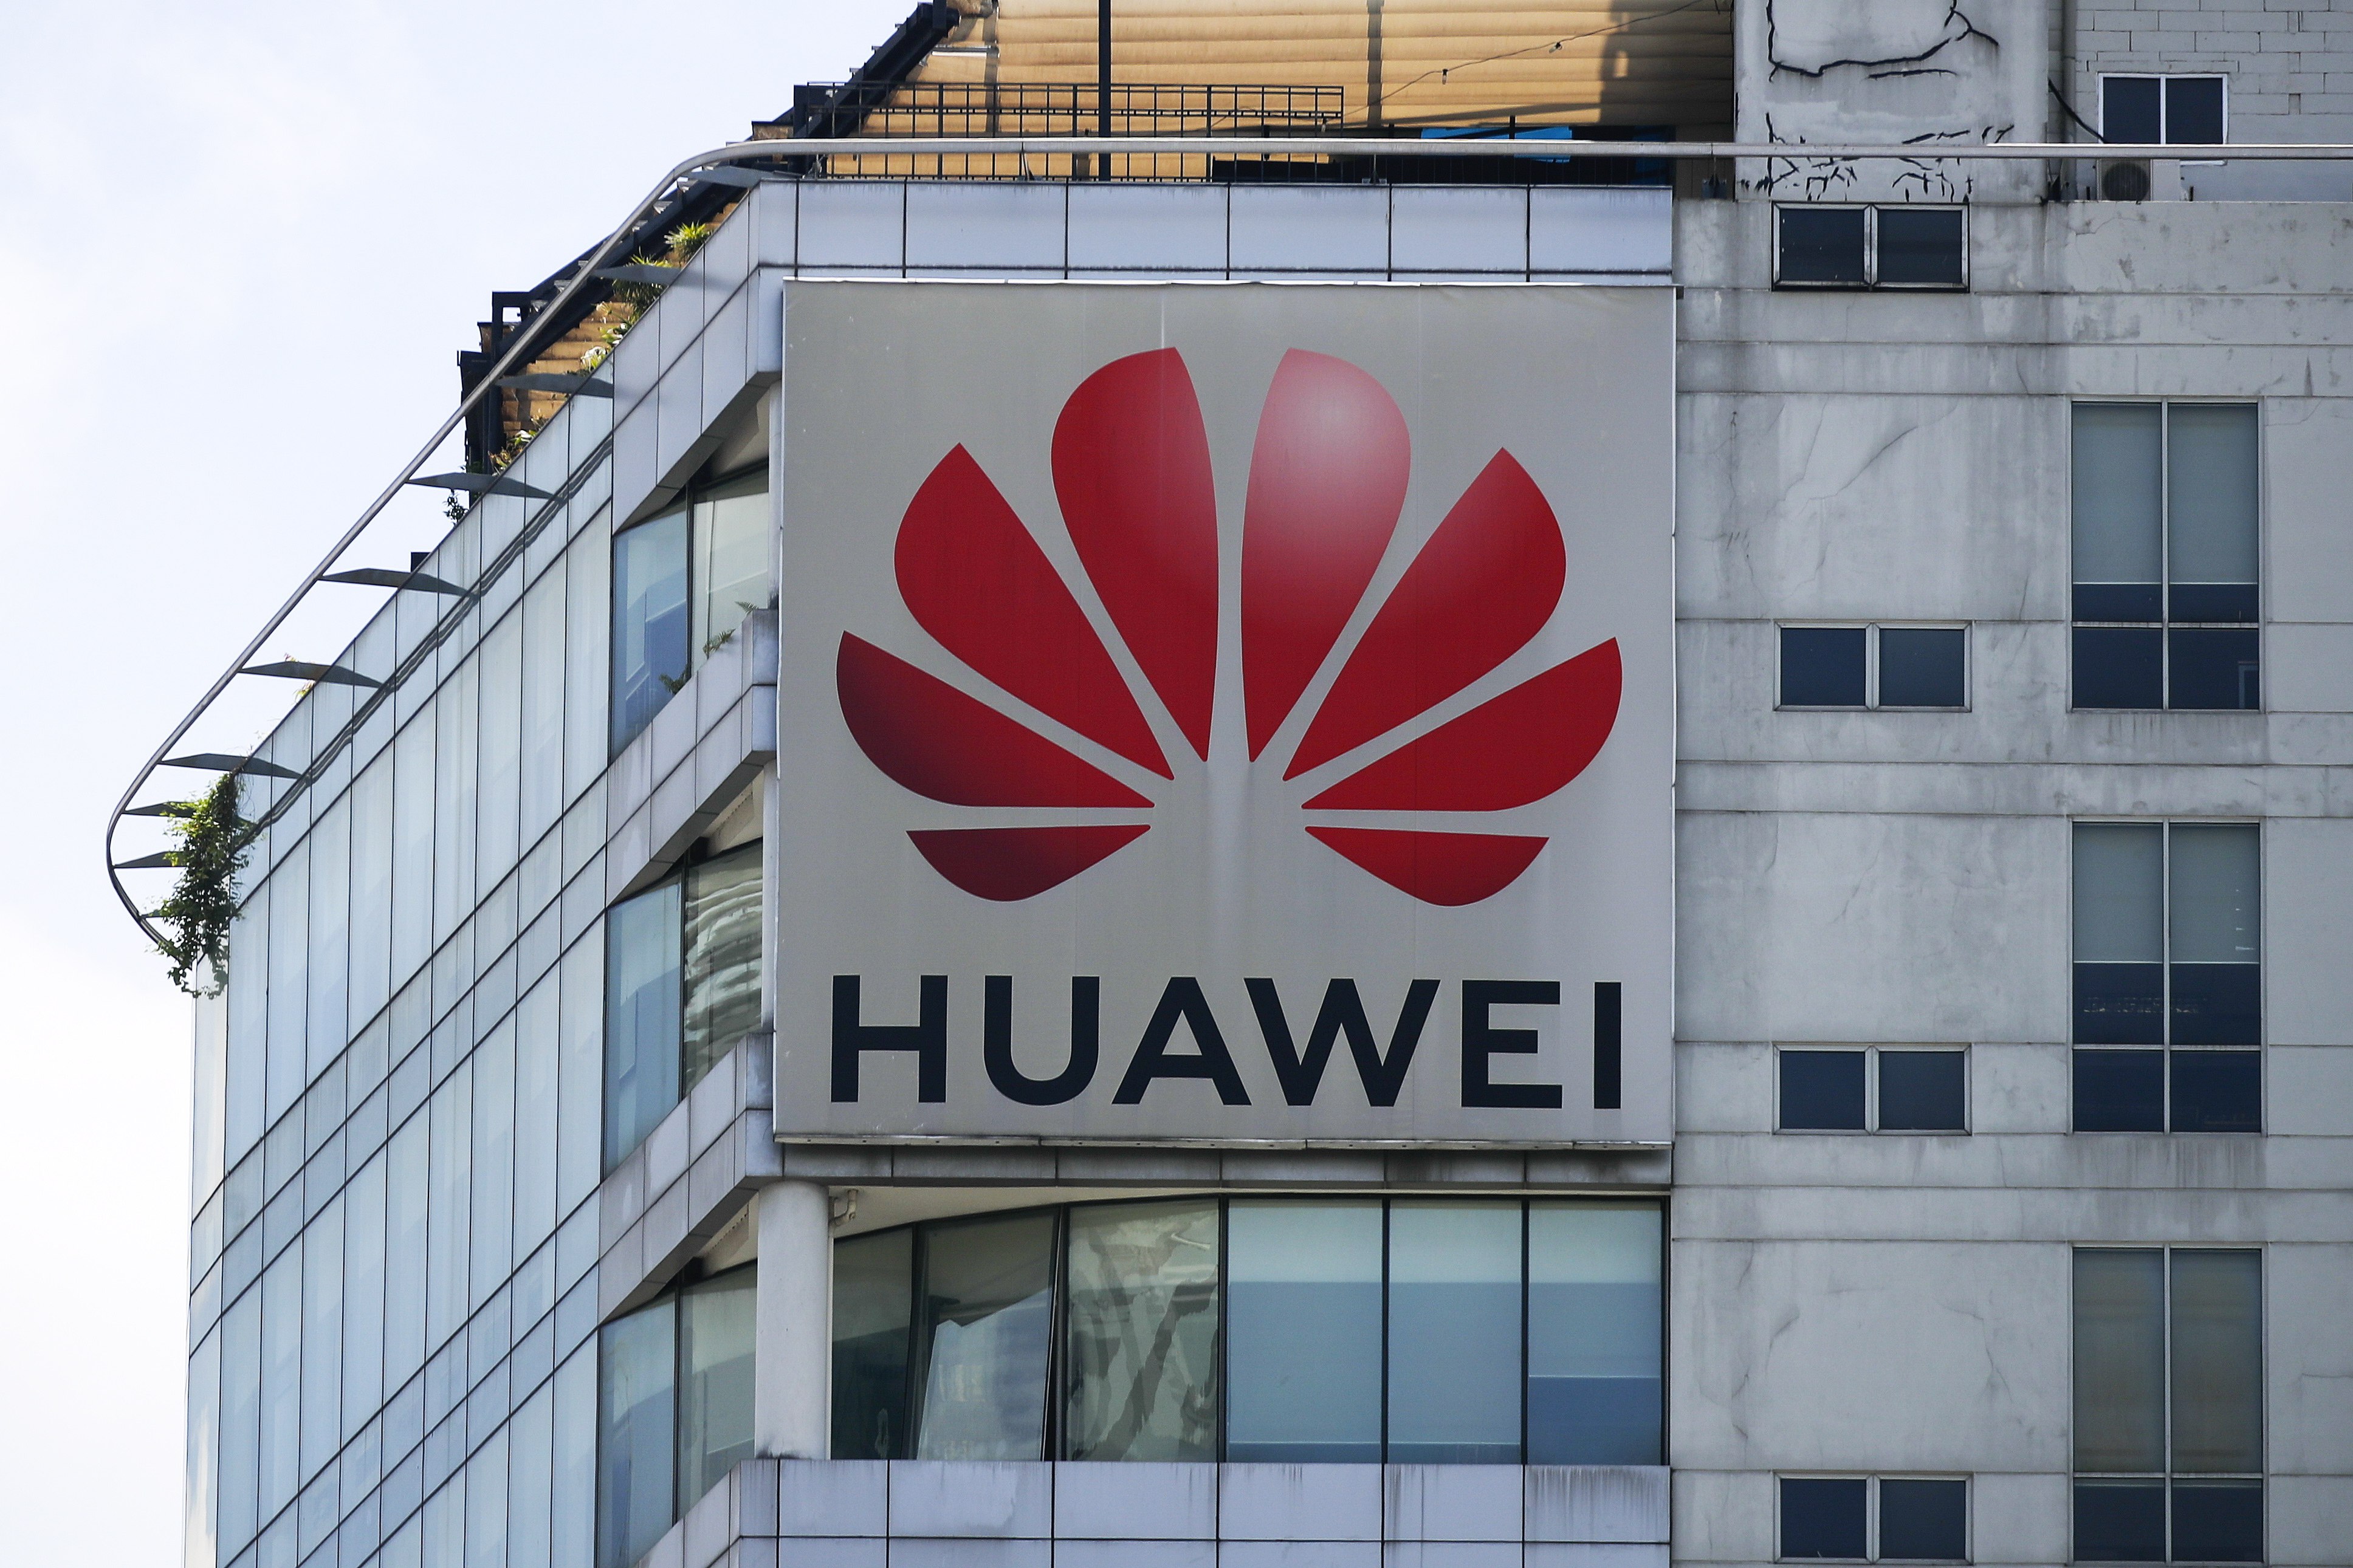 The logo of China’s Huawei Technologies on a building in Kuala Lumpur, Malaysia. The US and EU have warned the nation over possible risks to its national security amid a purported interest from Huawei for a role in Malaysia’s 5G network. Photo: EPA-EFE